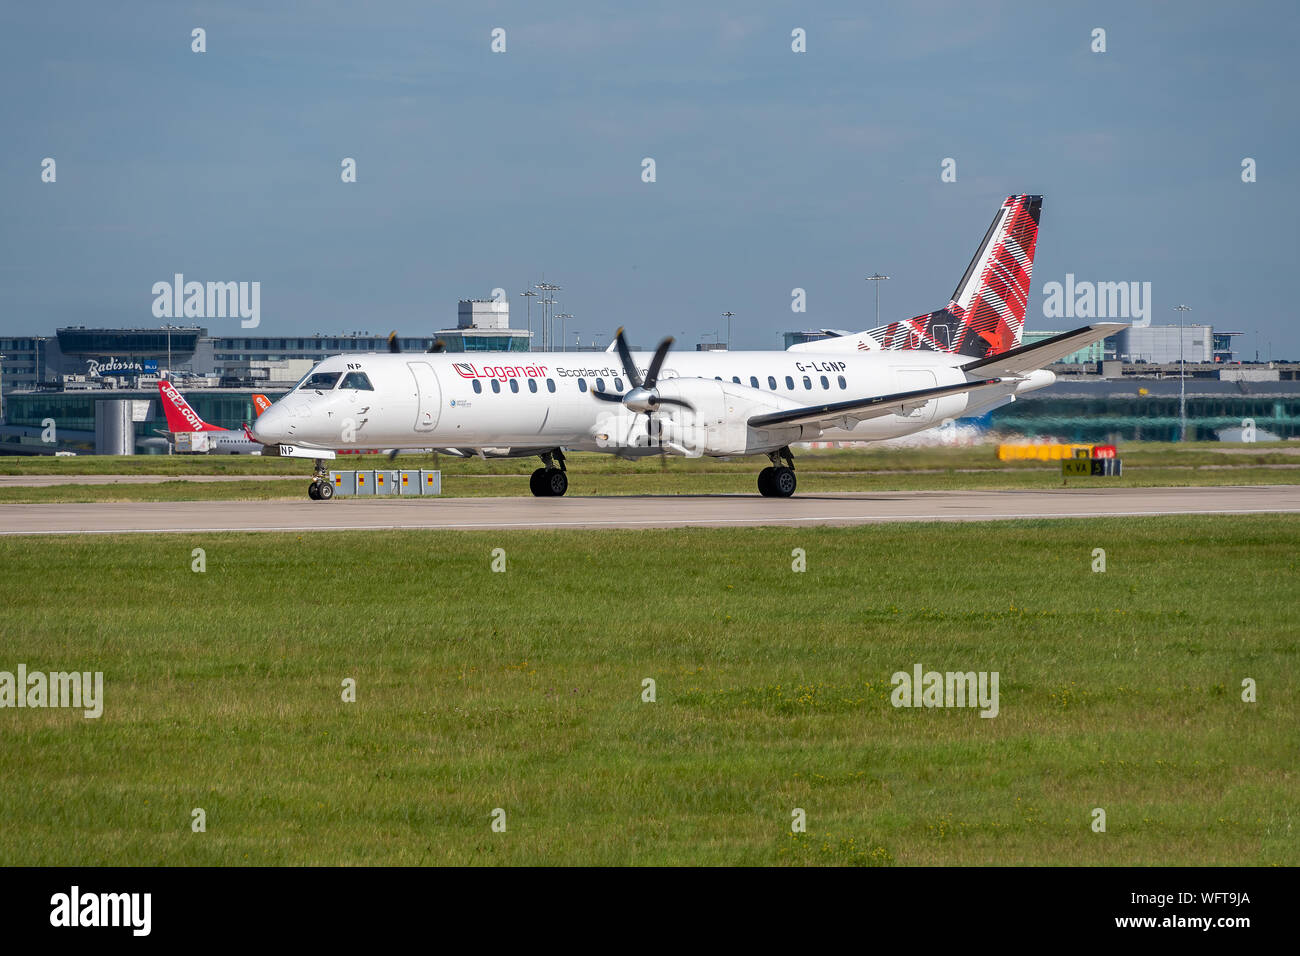 MANCHESTER, UNITED KINGDOM - AUGUST 24, 2019: Loganair Saab 2000 aircraft ready for takeoff Stock Photo